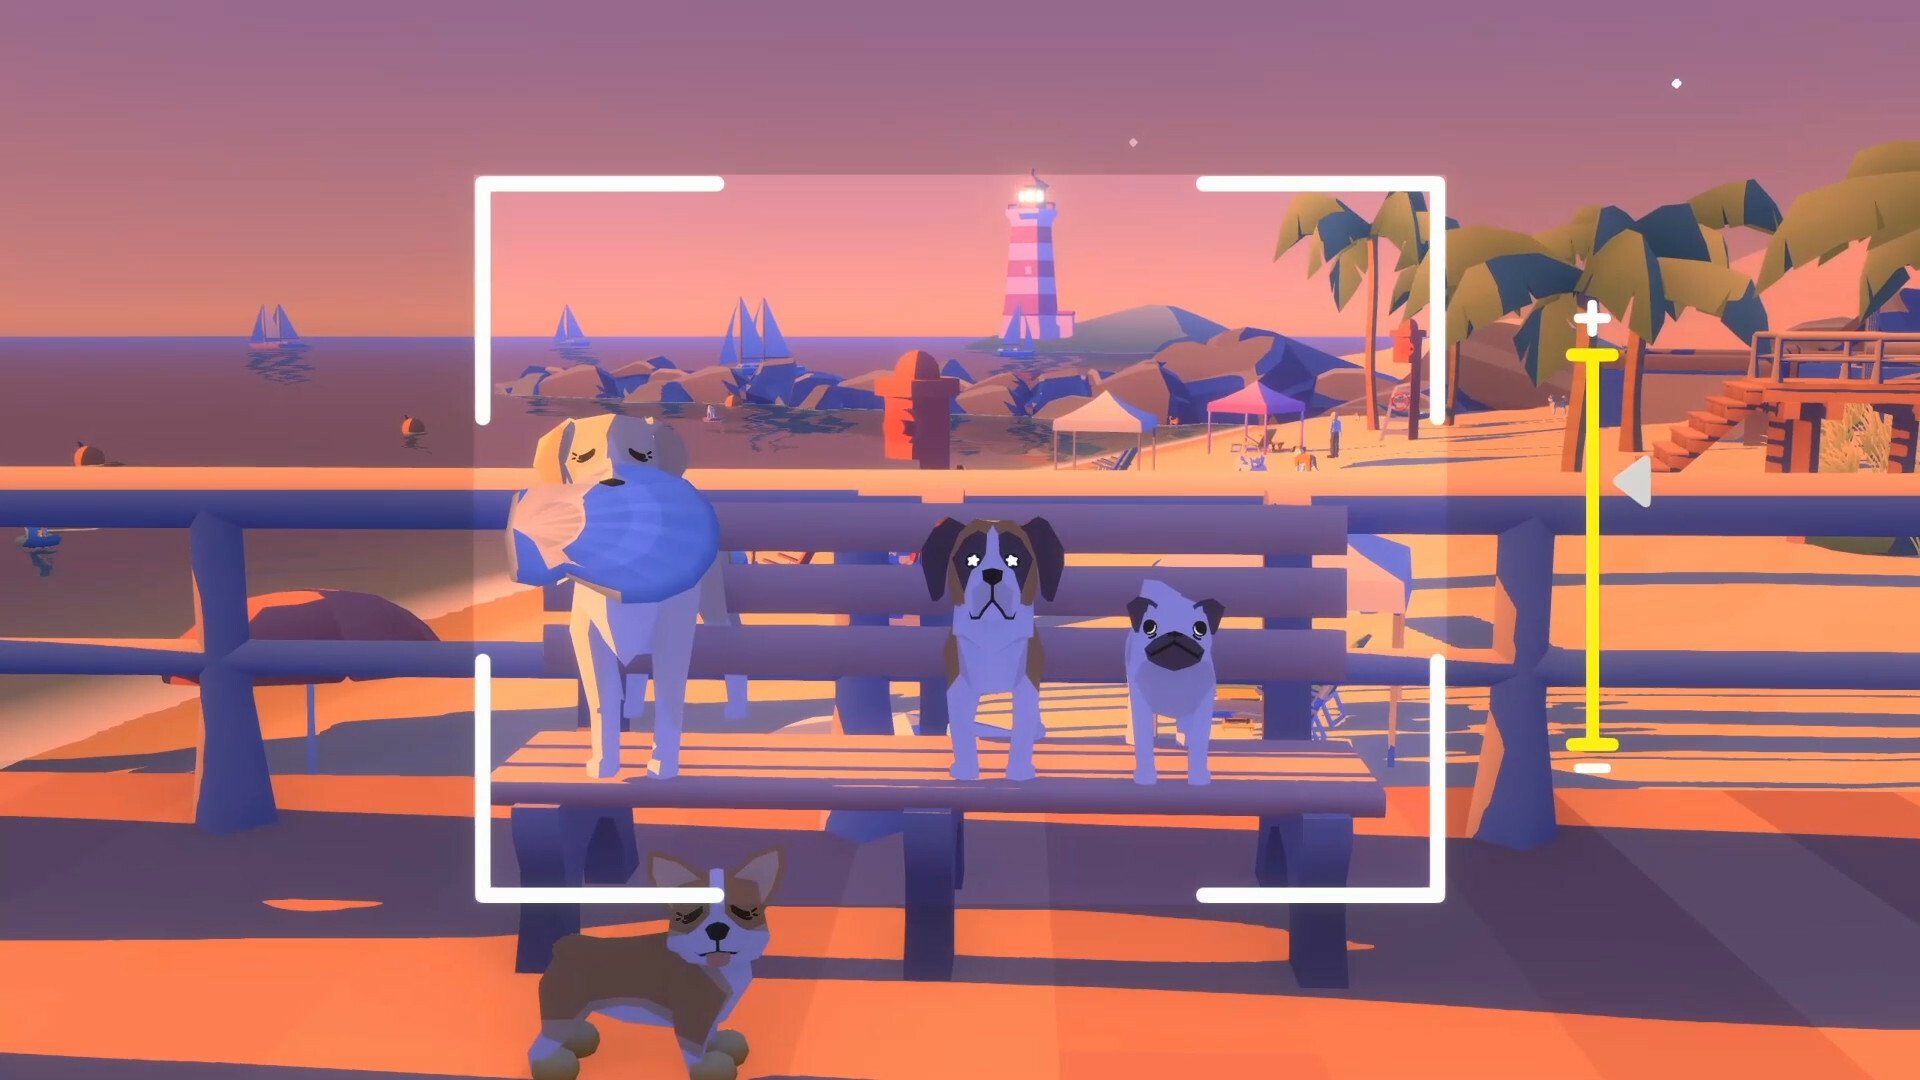 A screenshot from the video game "Pupperazzi." Four dogs on a beach boardwalk, as seen through a camera viewfinder.